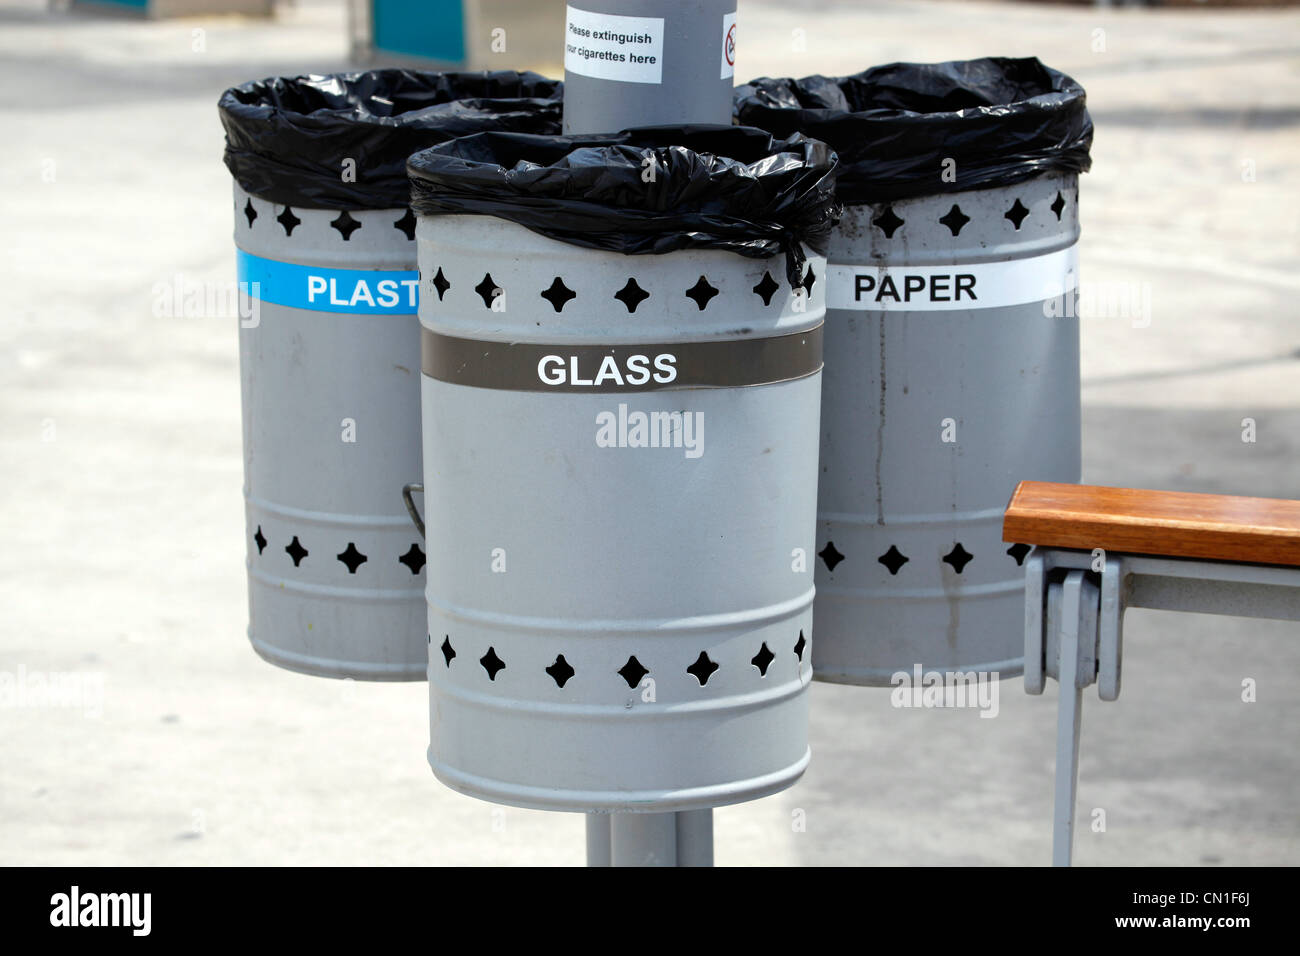 Recycling bins for plastic, glass and paper in Valletta, Malta Stock Photo